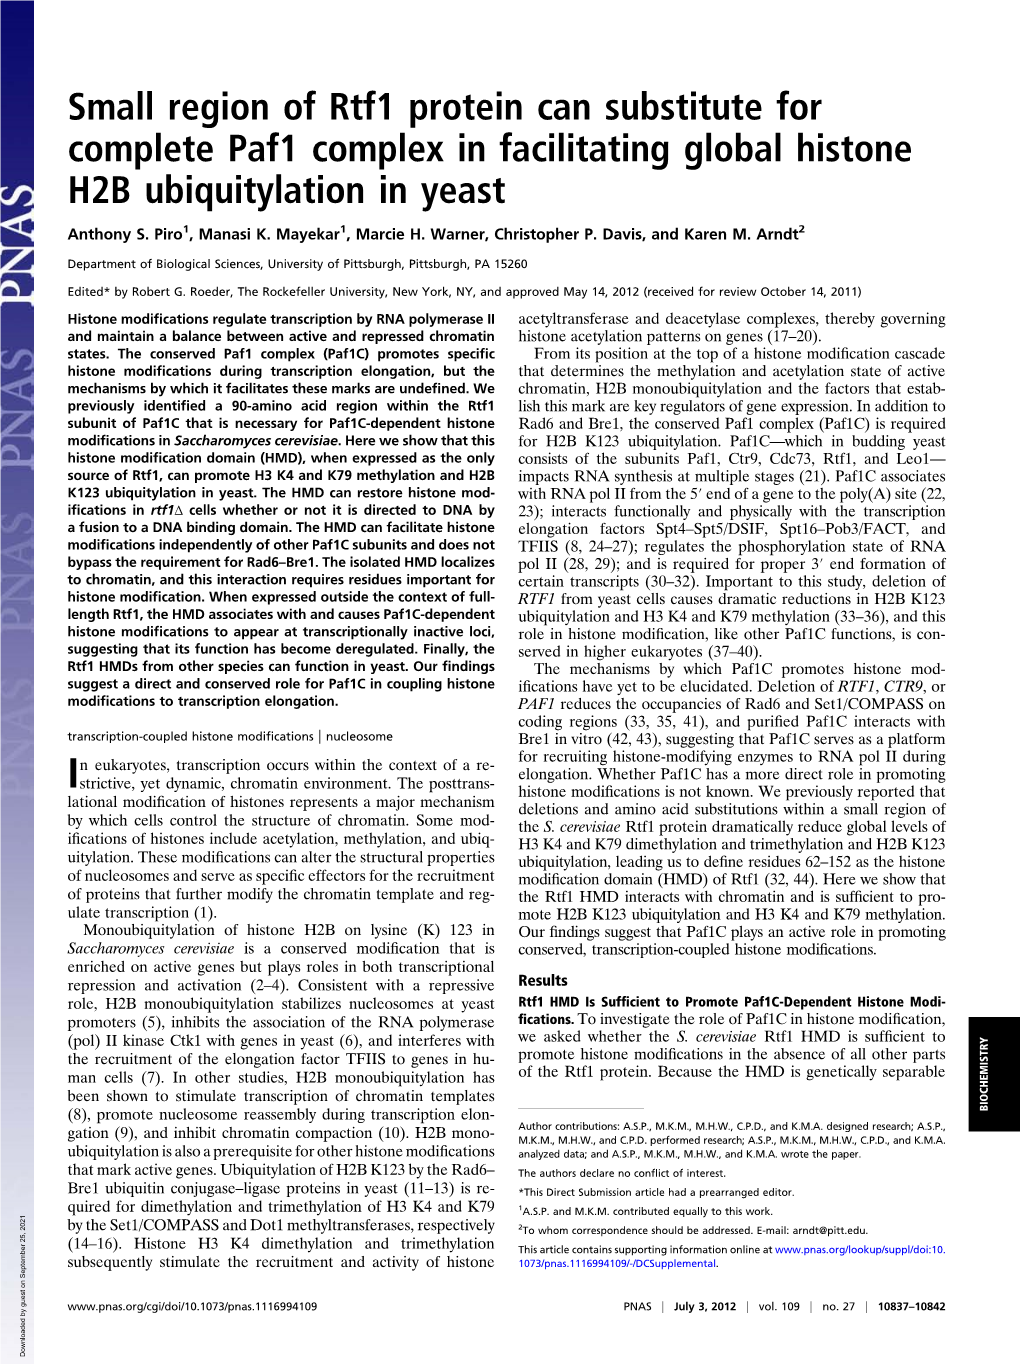 Small Region of Rtf1 Protein Can Substitute for Complete Paf1 Complex in Facilitating Global Histone H2B Ubiquitylation in Yeast